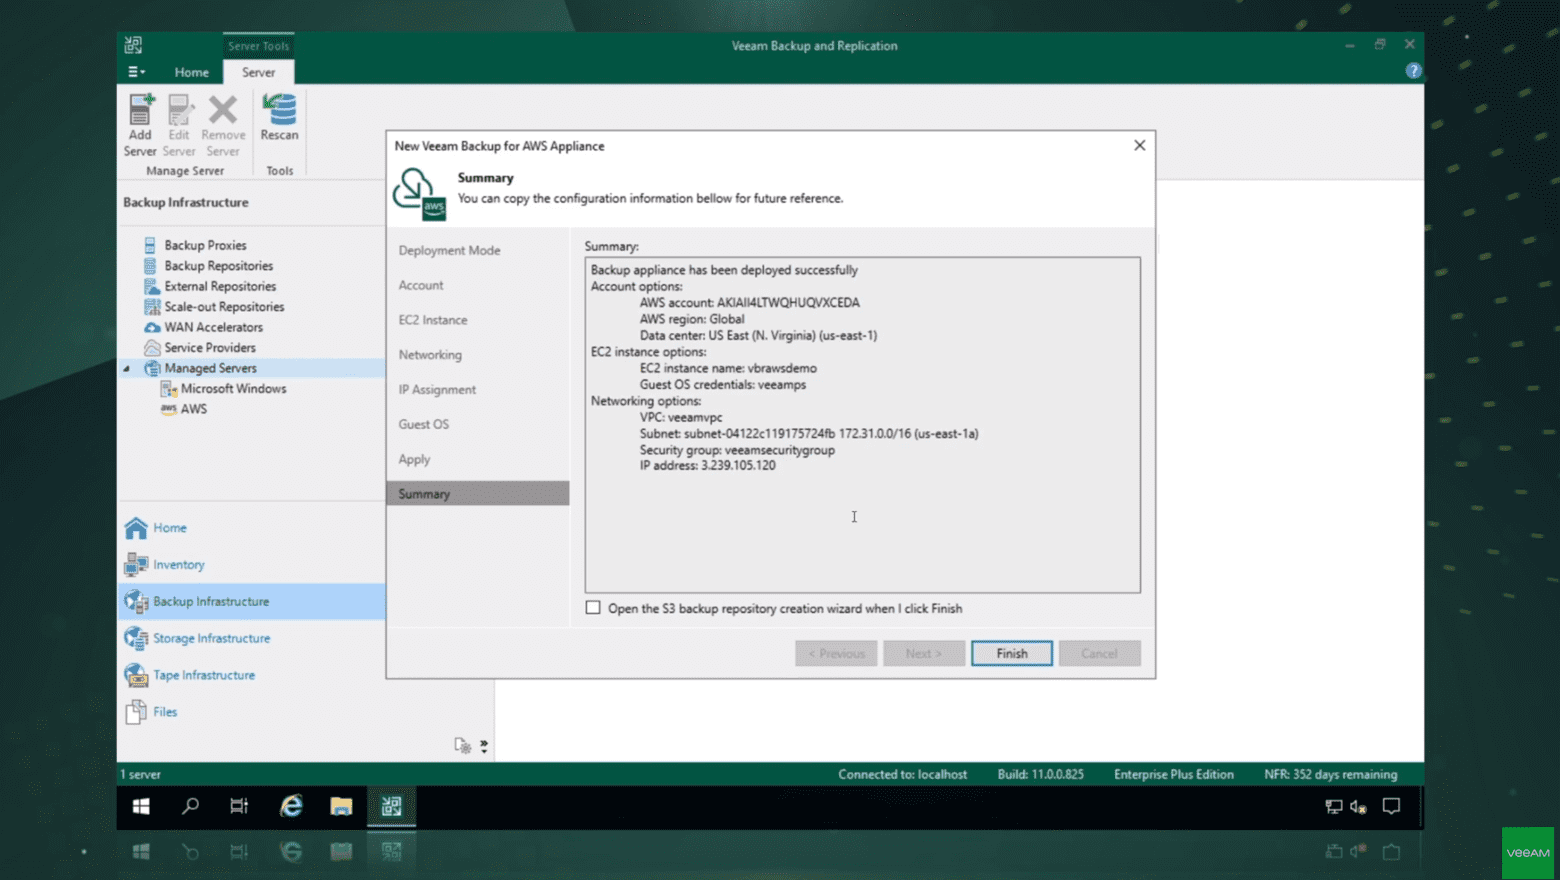 Deploy and configure from Veeam Backup & Replication